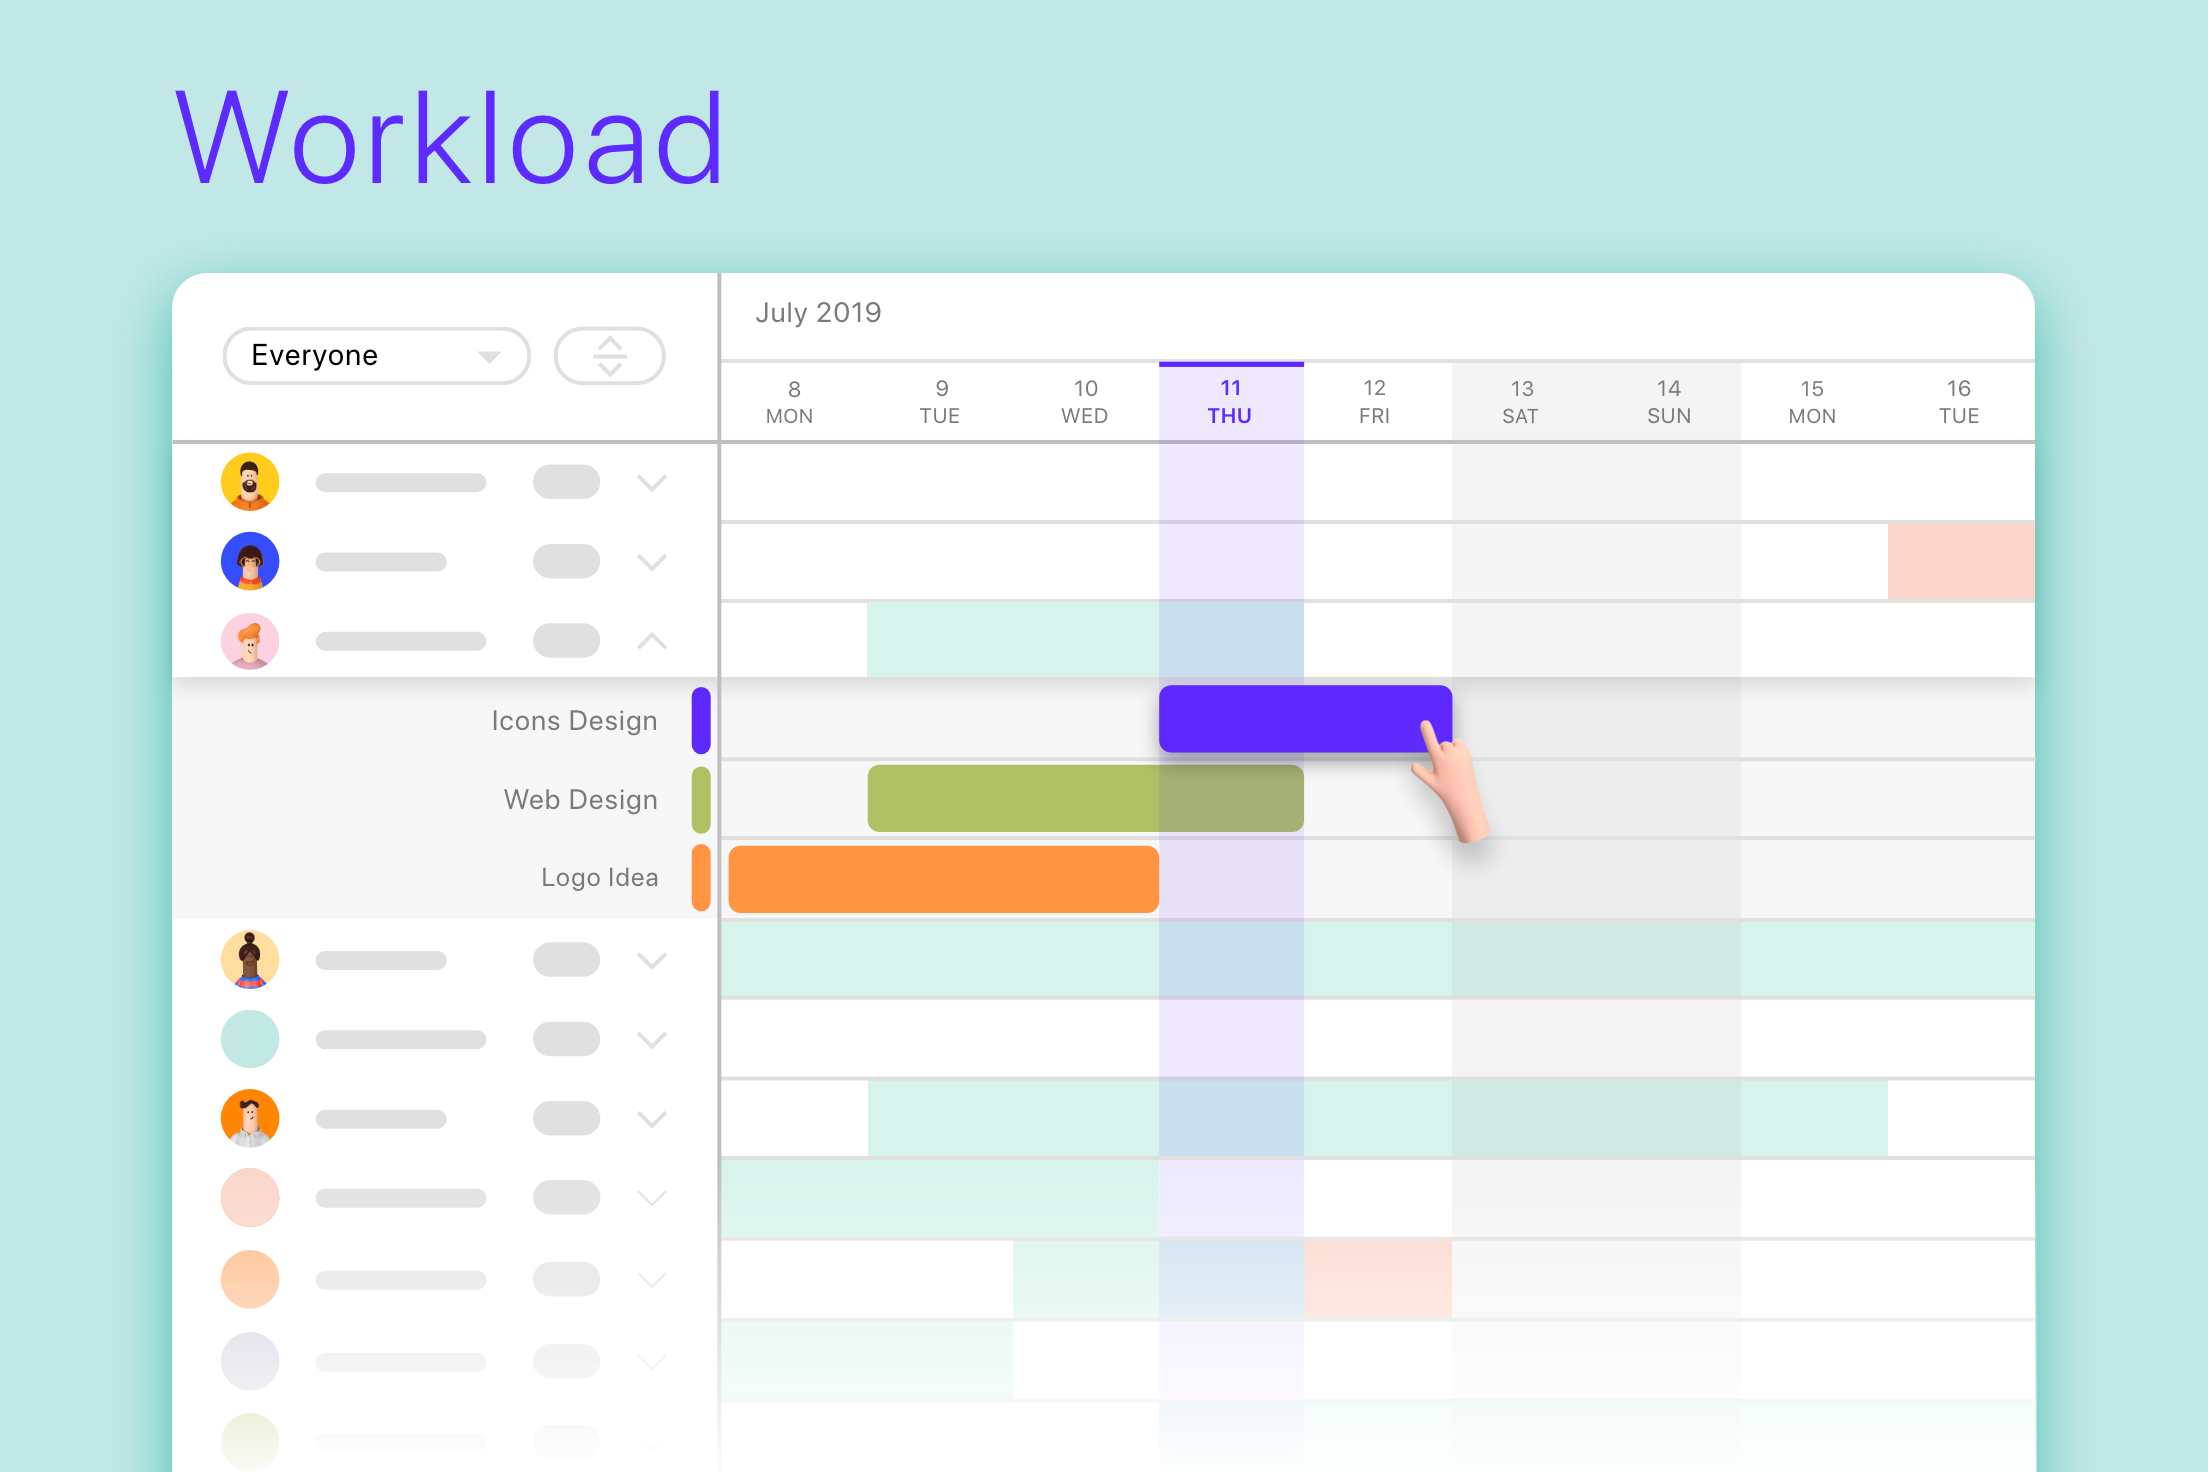 ActiveCollab Software - ActiveCollab Workload is a visual resource management tool built for agencies and creative professionals.